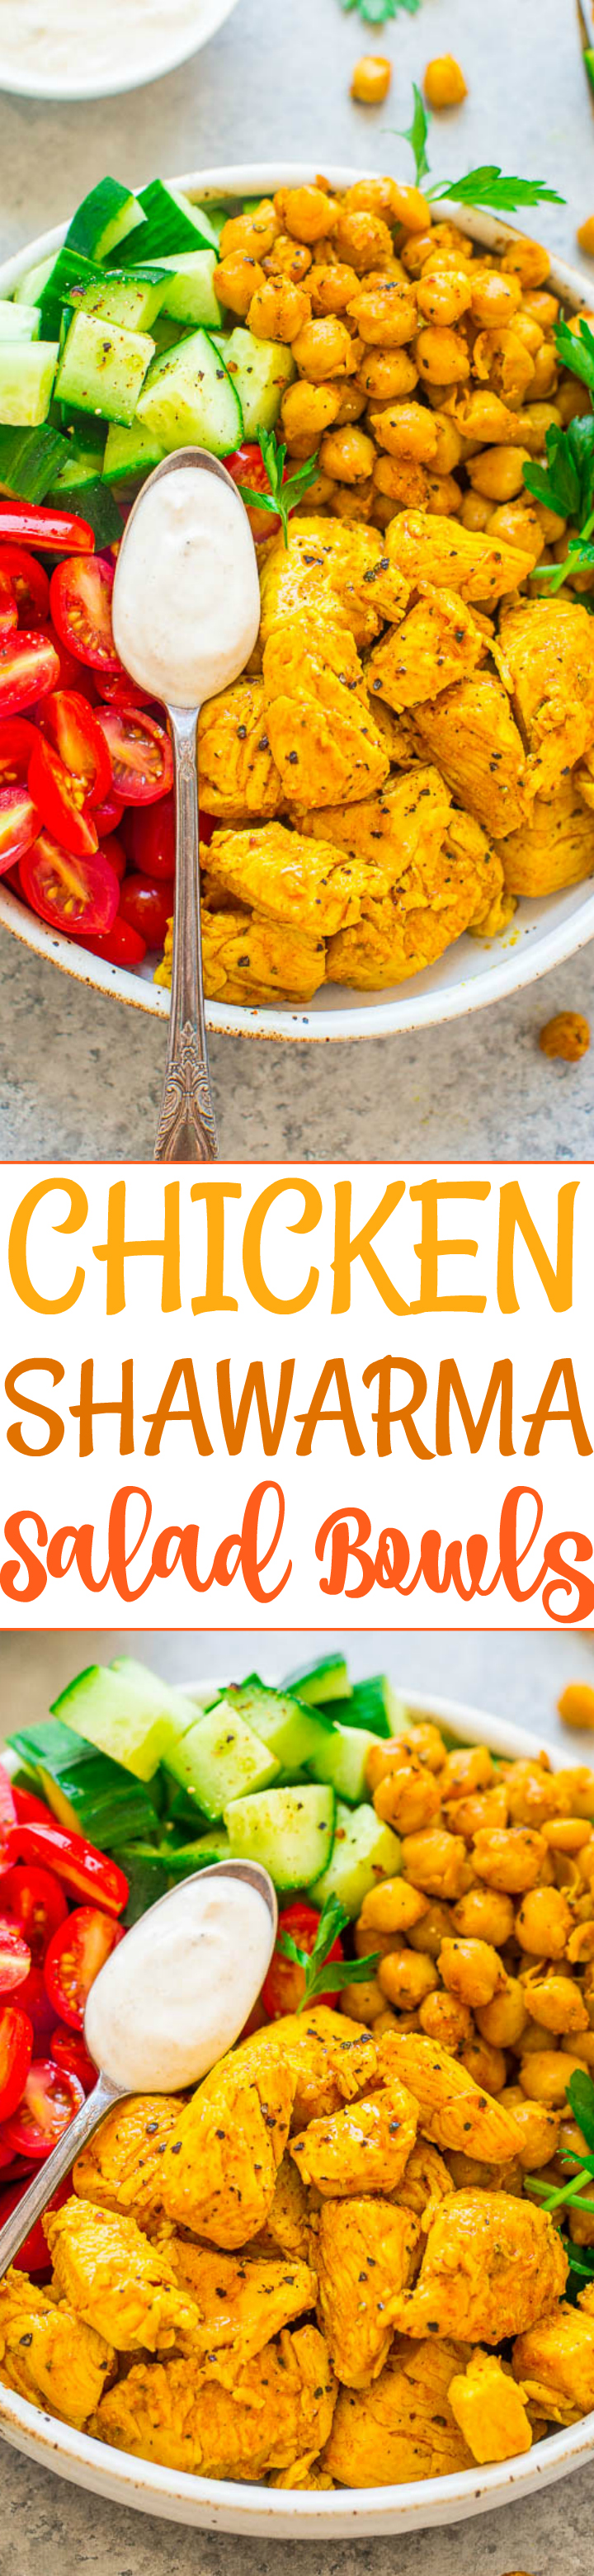 Easy Chicken Shawarma Salad Bowls - An EASY version of chicken shawarma that's fast, HEALTHY, and delish!! Fragrant spices, juicy lemony chicken, fresh veggies, and a tangy Greek-yogurt sauce that's cooling and PERFECT!!